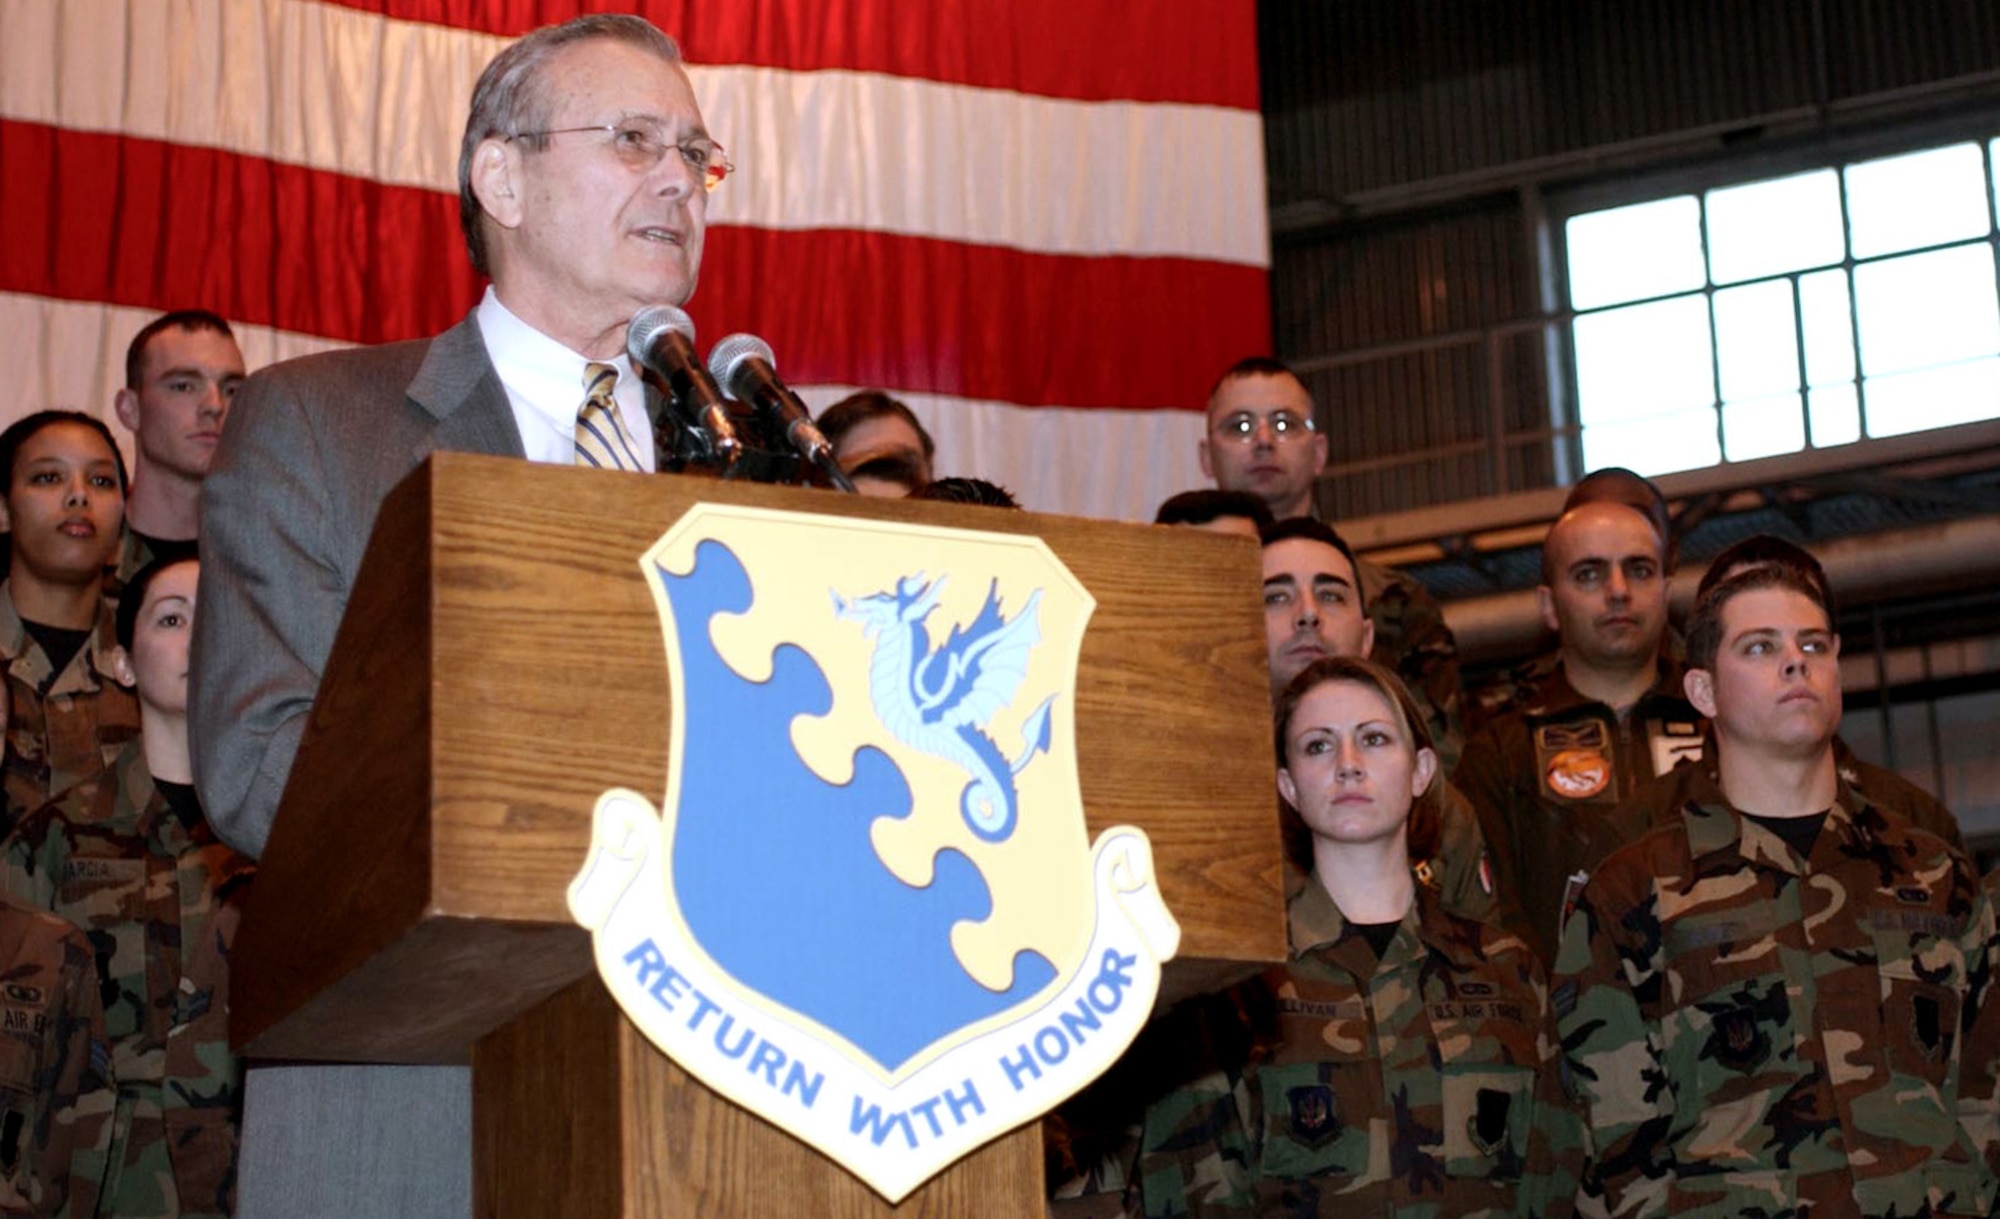 AVIANO AIR BASE, Italy (AFPN) -- Secretary of Defense Donald Rumsfeld speaks with servicemembers during a town hall meeting Feb. 7 at Aviano Air Base, Italy. Rumsfeld visited the Air Force's only fighter wing south of the Alps for a few hours as part of a trip to gain European support for the global war on terrorism and future contingencies. (U.S. Air Forec photo by Staff Sgt. Staci L. Rosenberger)